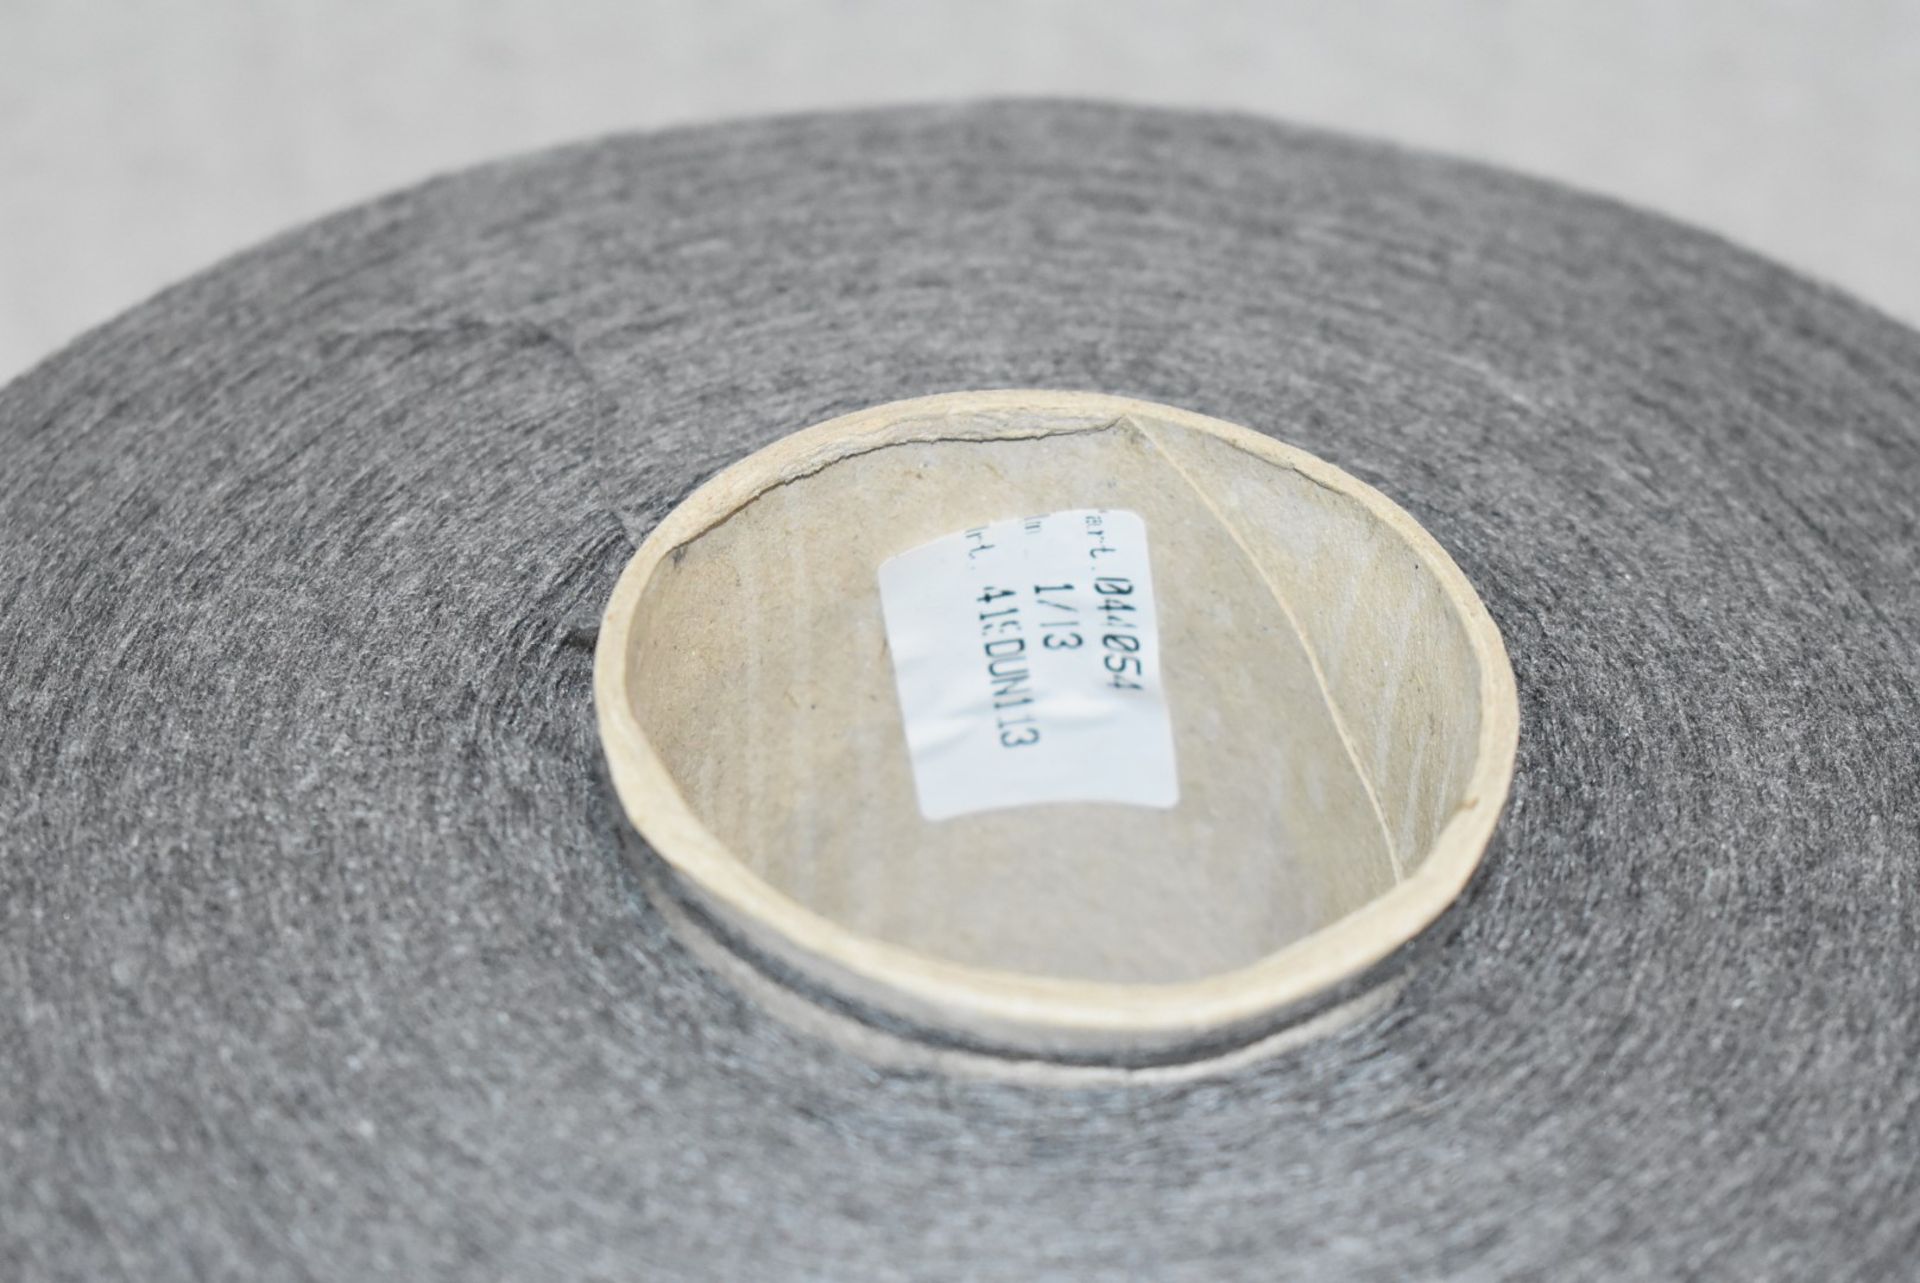 1 x Cone of 1/13 MicroCotton Knitting Yarn - Mid Grey - Approx Weight: 2,500g - New Stock ABL Yarn - Image 8 of 10